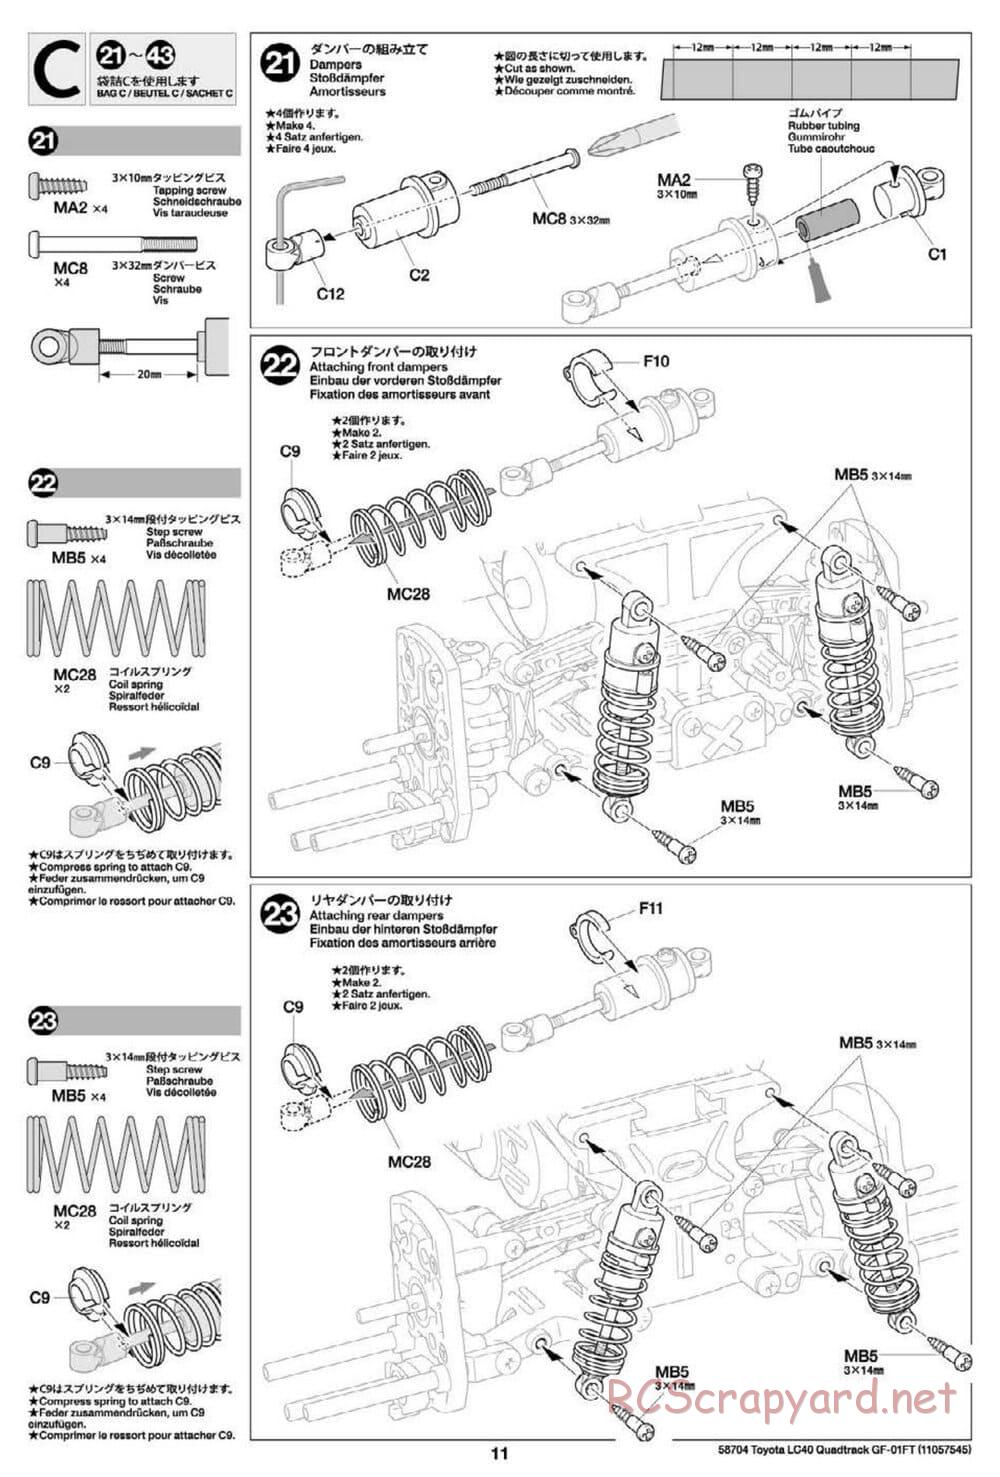 Tamiya - Toyota Land Cruiser 40 Pick-Up Quadtrack - GF-01FT Chassis - Manual - Page 11